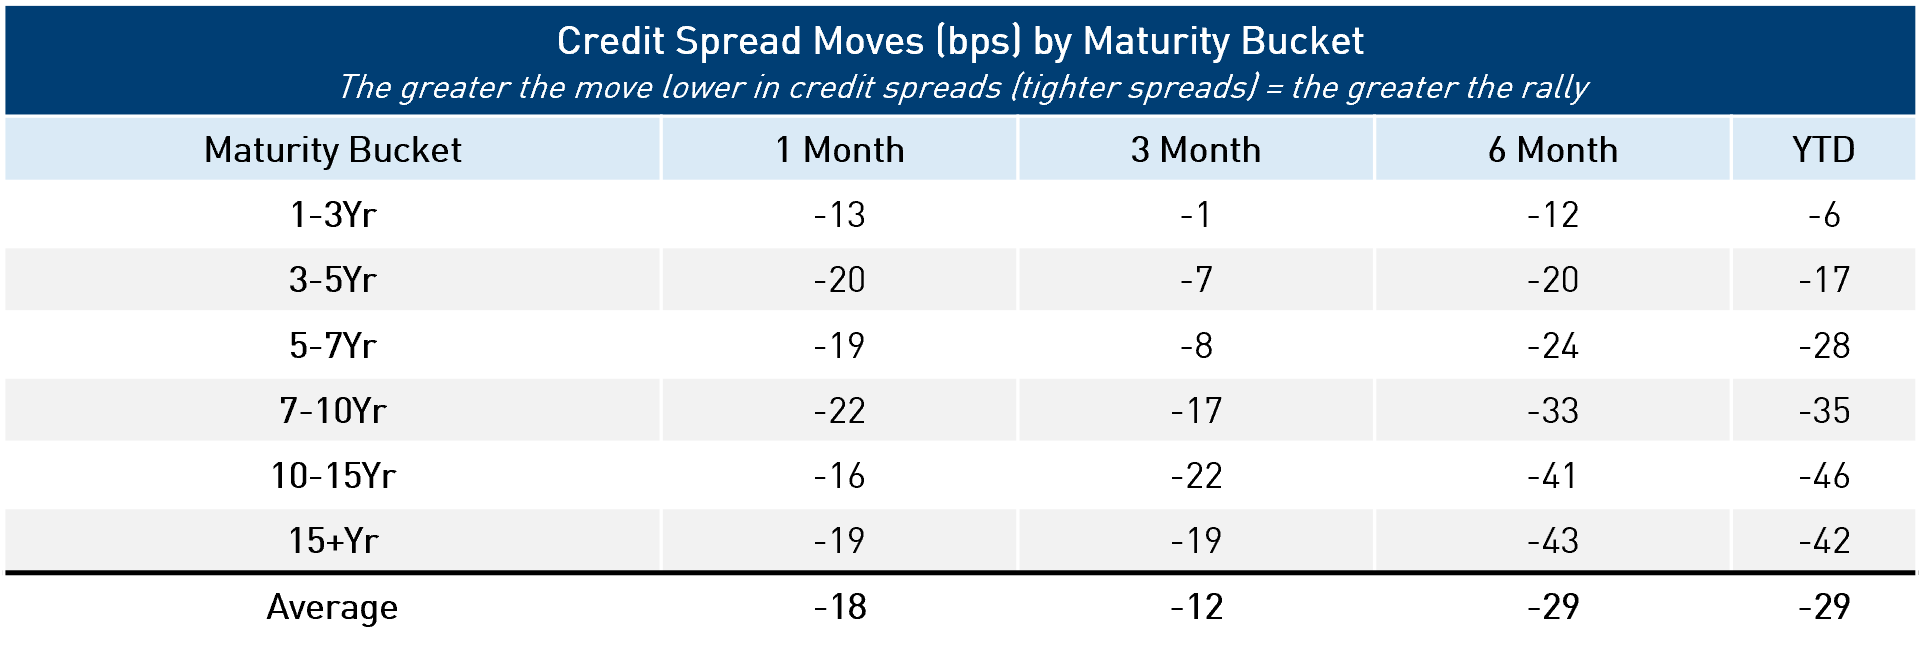 Table Showing Credit Spread Moves (bps) by Maturity Bucket